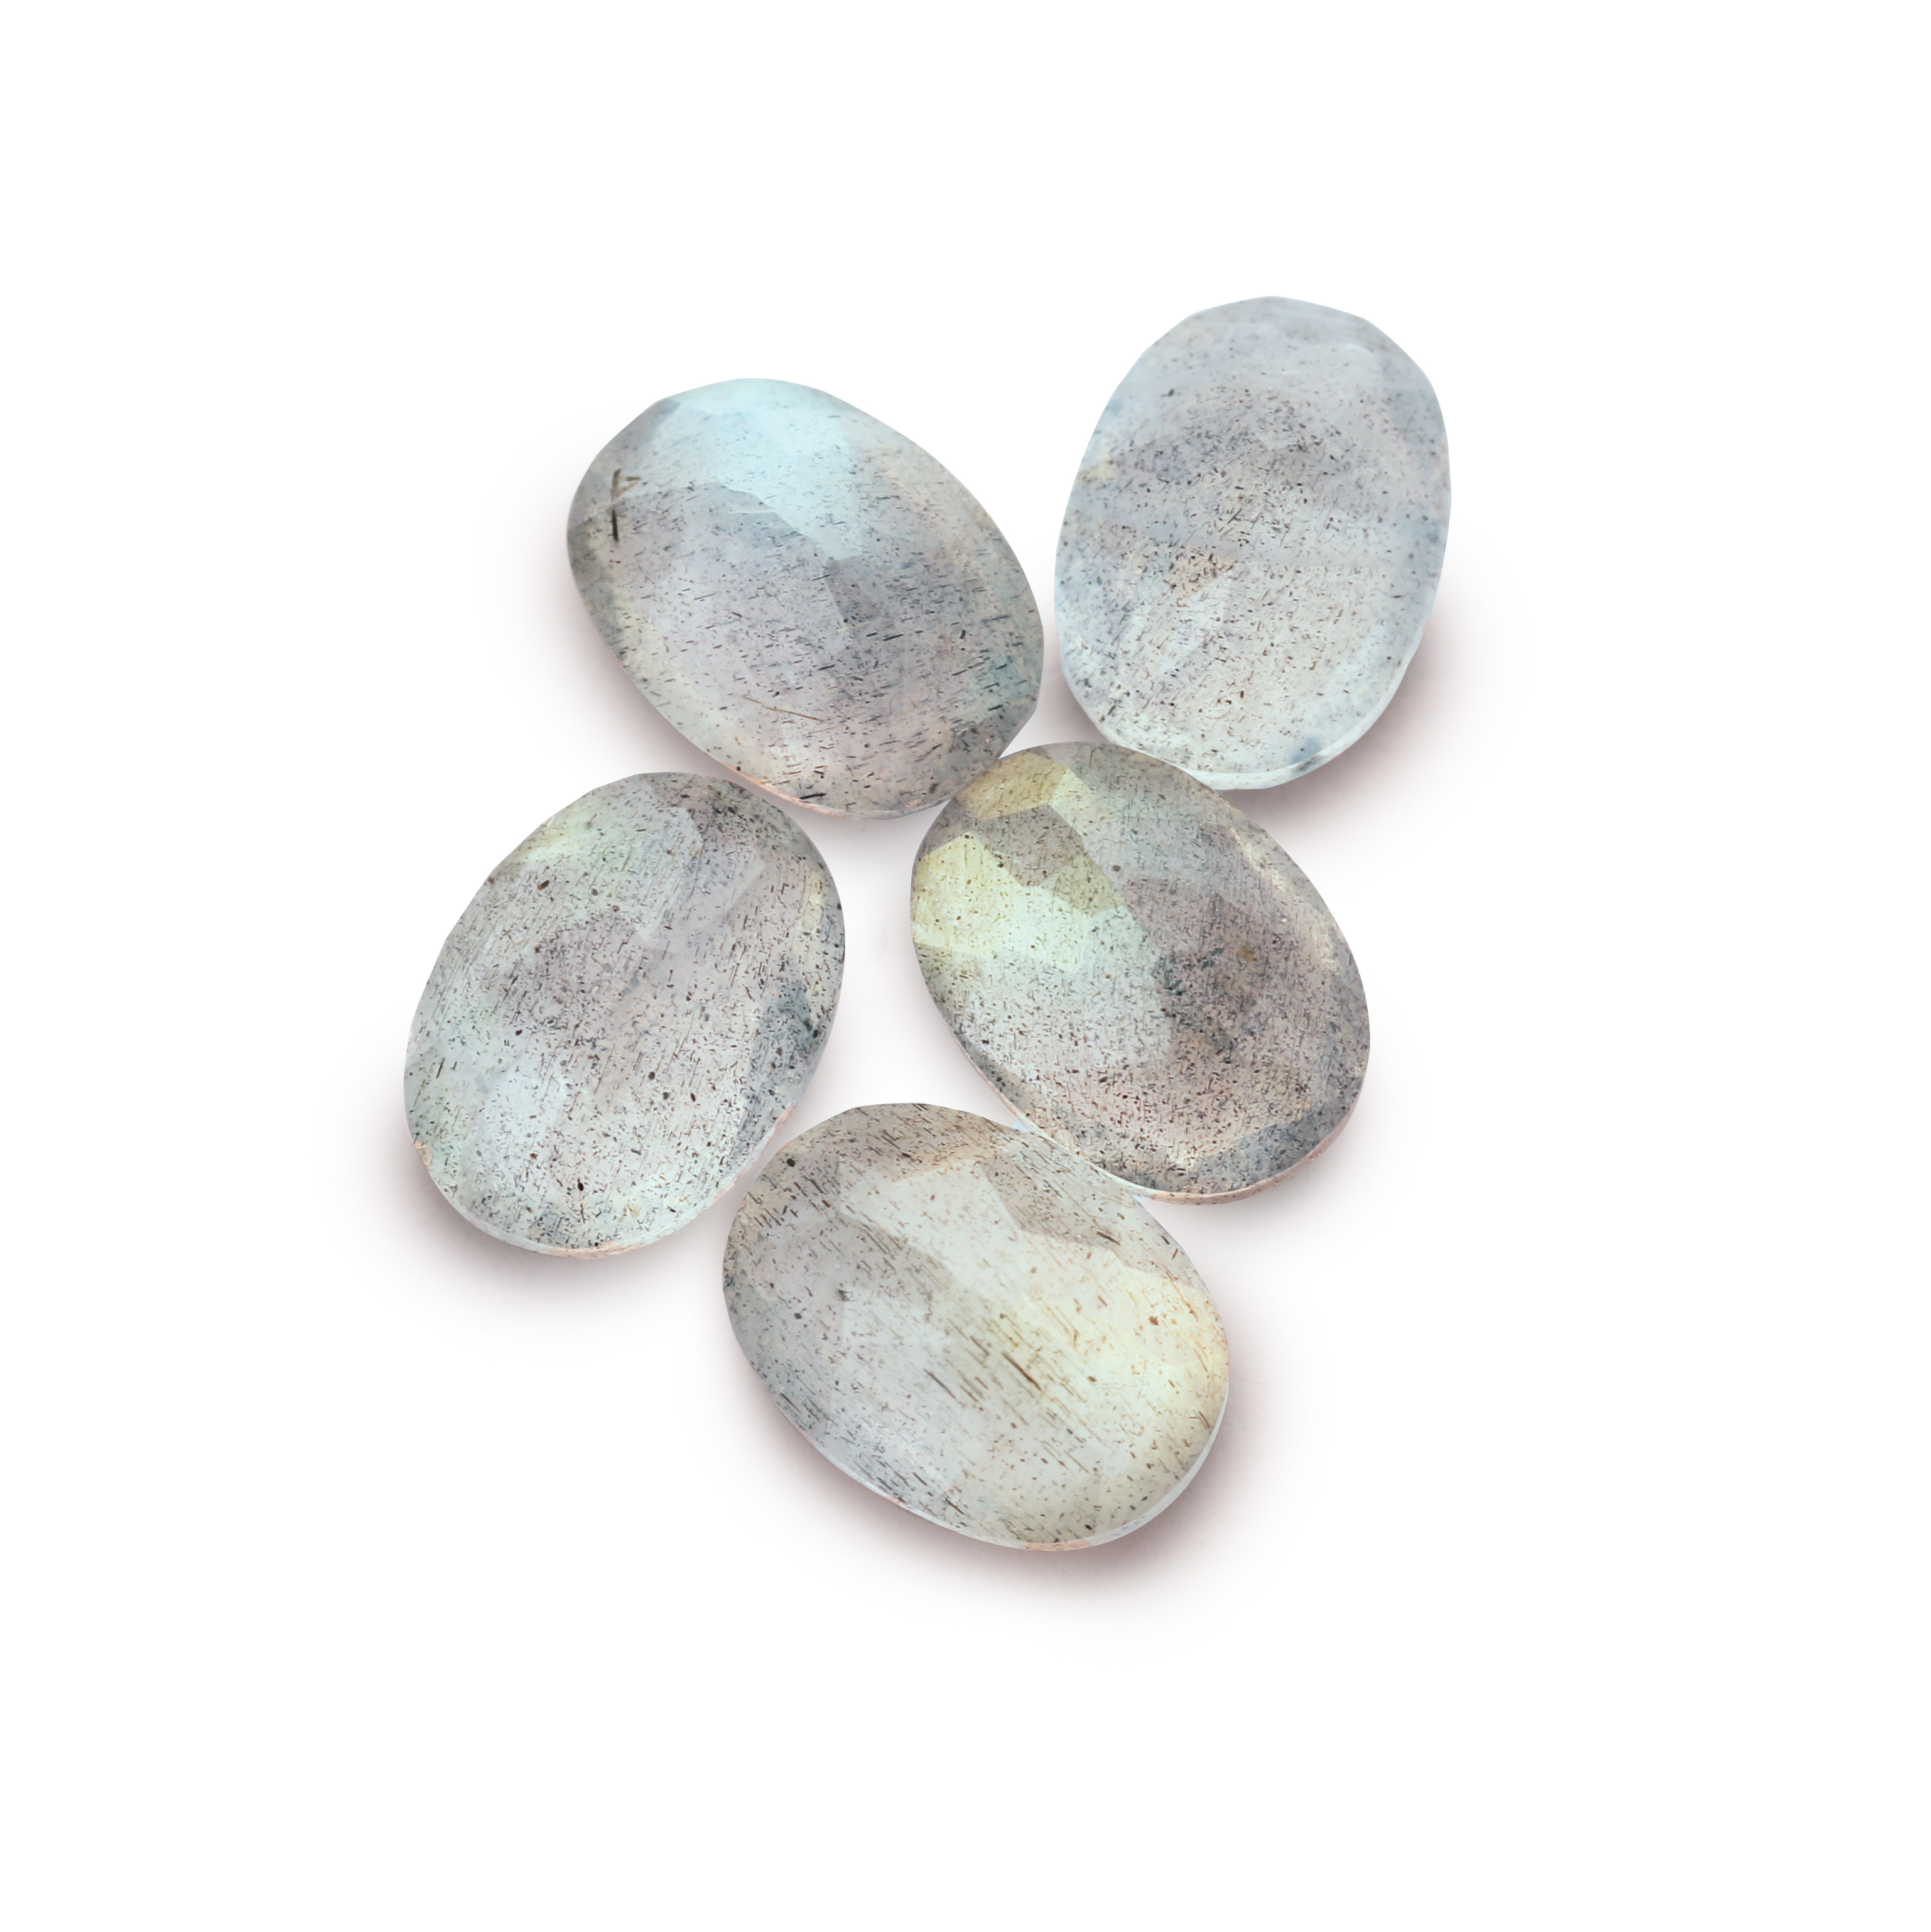 6x8MM Oval Labradorite Faceted Stone,Natural Gemstone,Unique Gemstone,Loose Stone,DIY Jewelry Supplies 4120148 - Click Image to Close